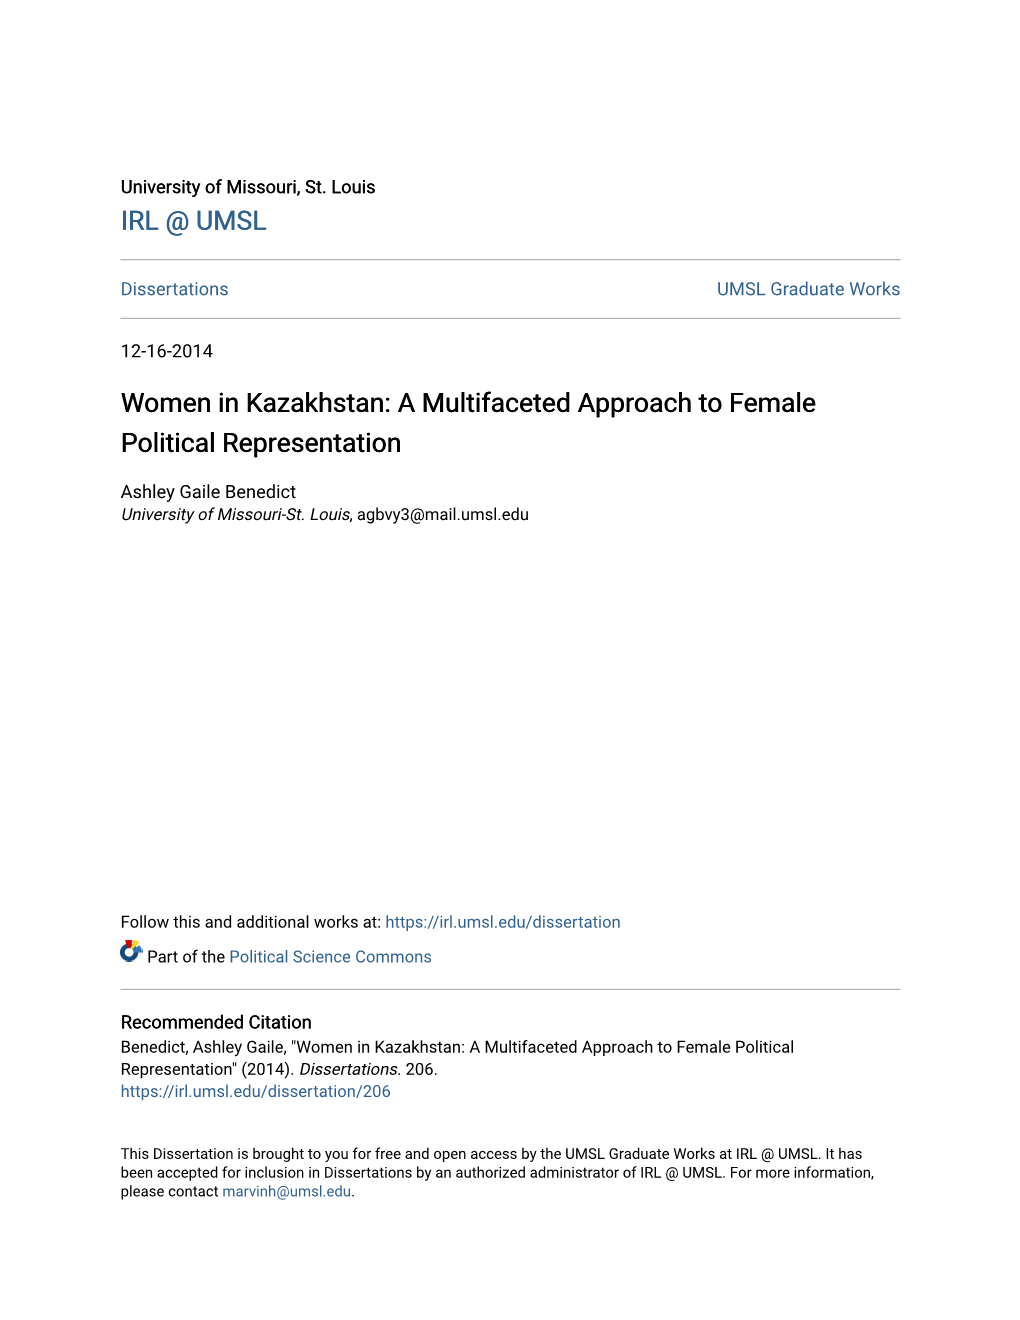 Women in Kazakhstan: a Multifaceted Approach to Female Political Representation